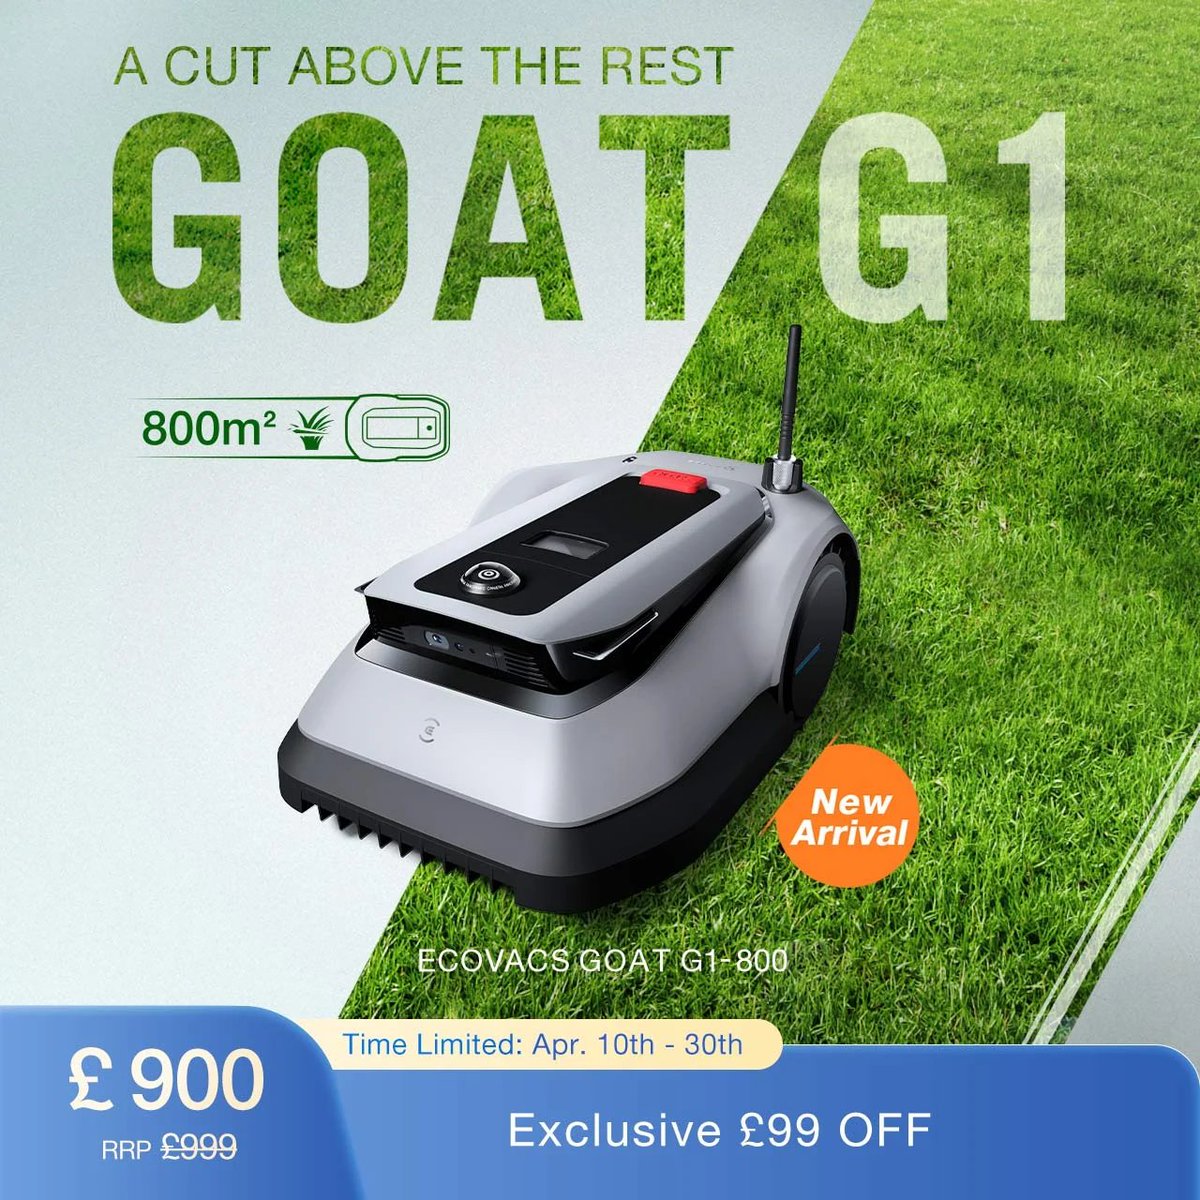 Elevate your home & garden with Ecovacs UK! 🌟 Save £99 on Robotic Lawn Mower 🍃 & £29 on Window Cleaner 🏠 Don't miss out! tidd.ly/49QZD1K #AutomationRevolution #affiliatelink